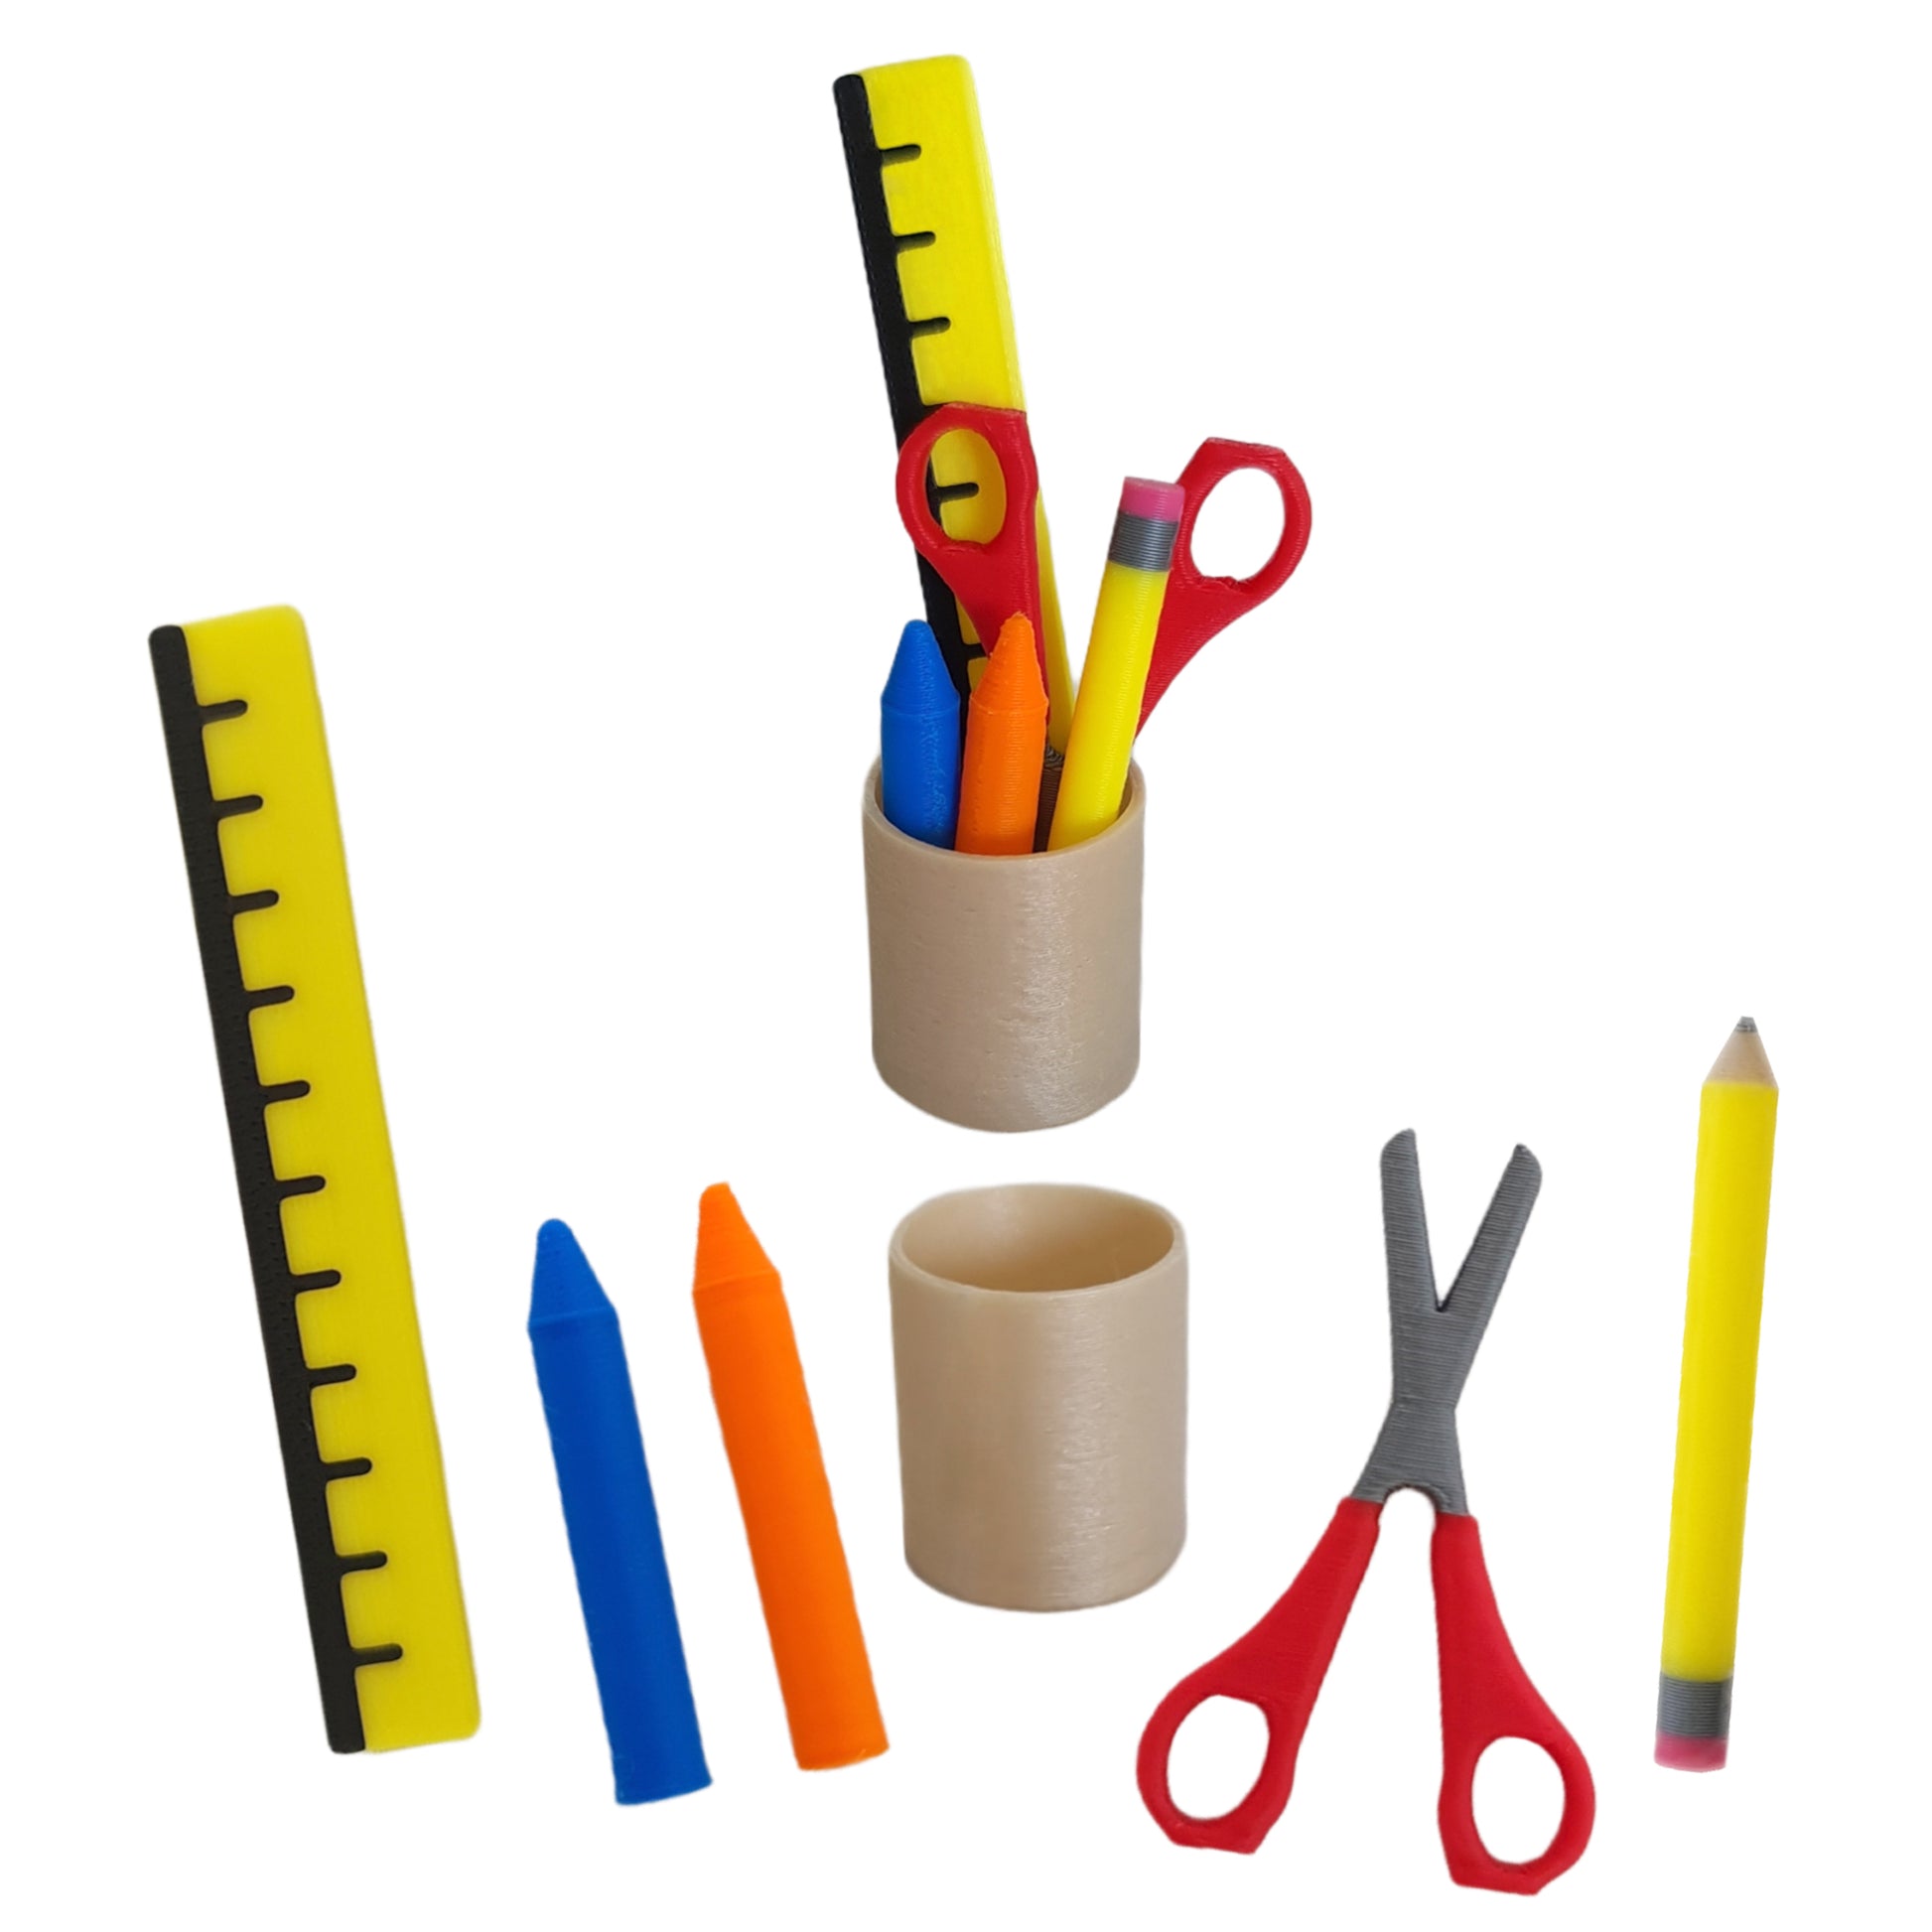 Stationery Set Elf prop, miniature ruler, crayons, tiny scissors, pencil and cup holder